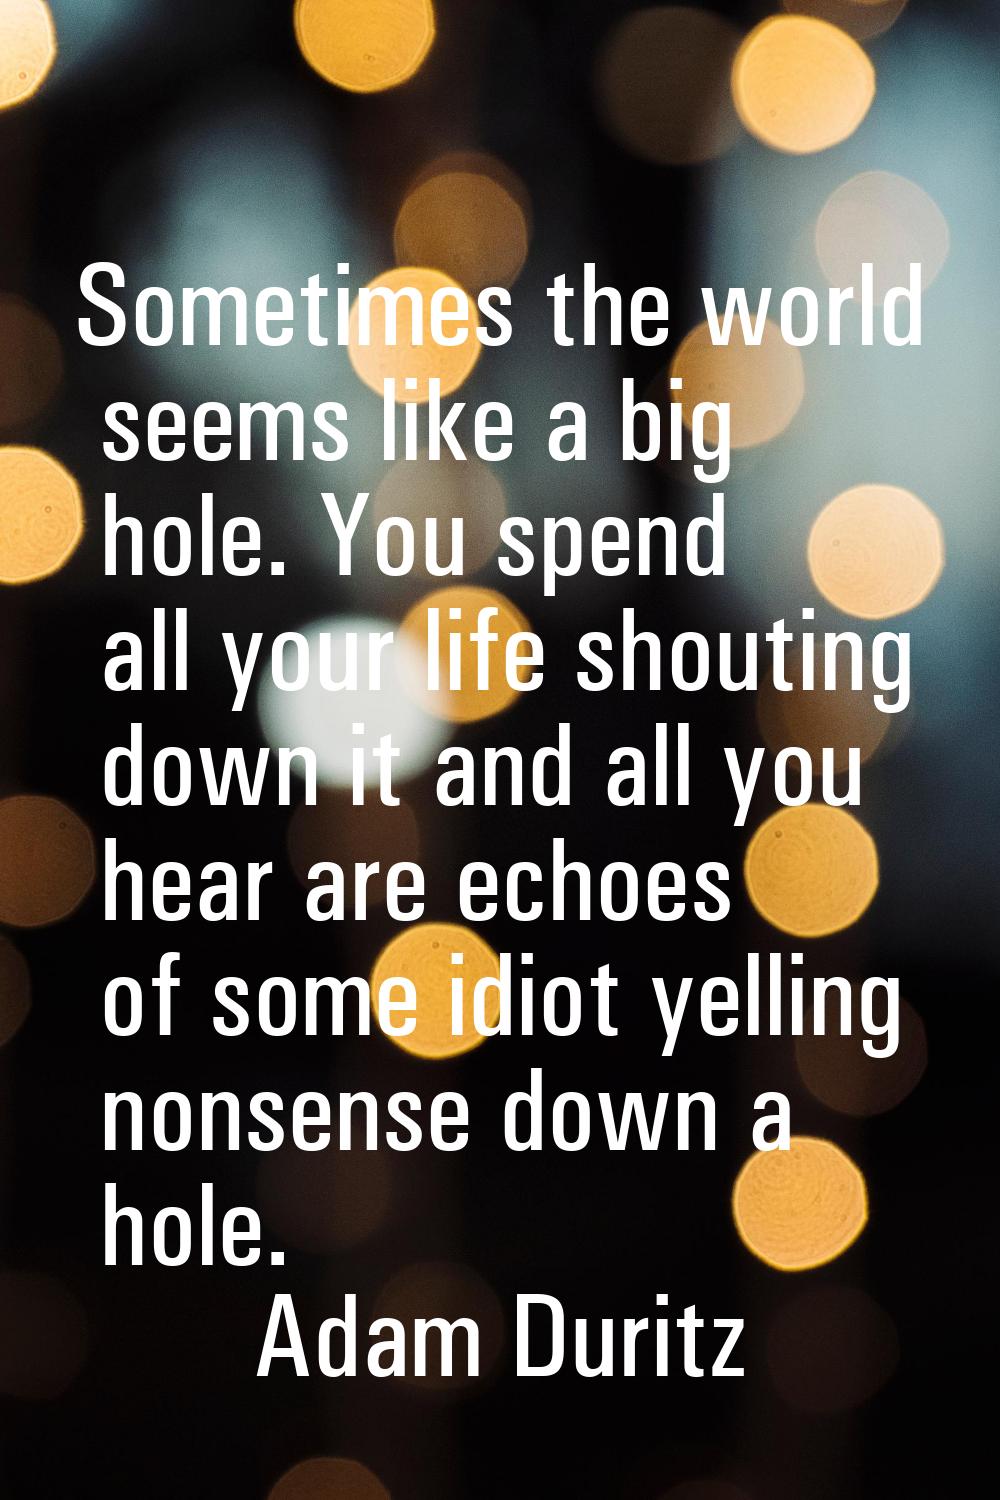 Sometimes the world seems like a big hole. You spend all your life shouting down it and all you hea